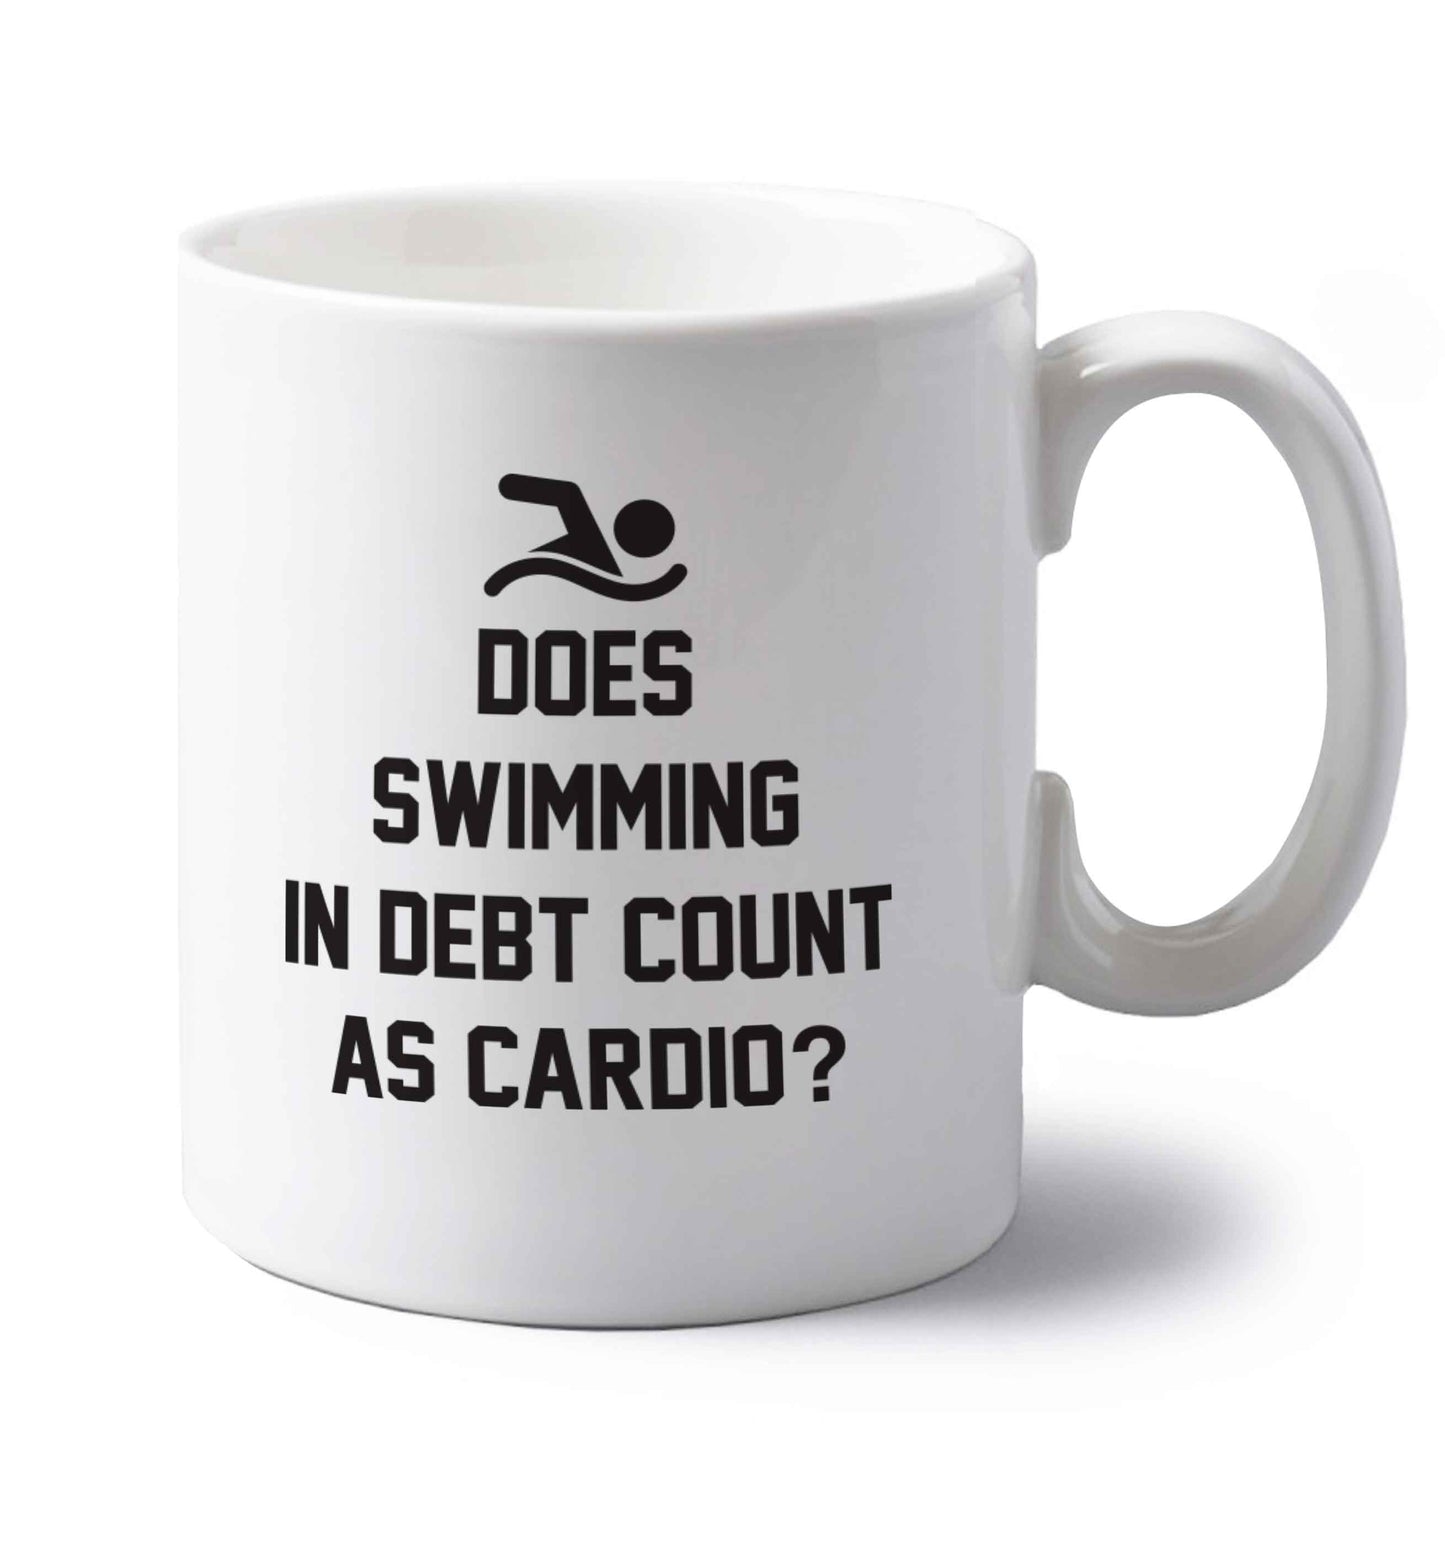 Does swimming in debt count as cardio? left handed white ceramic mug 